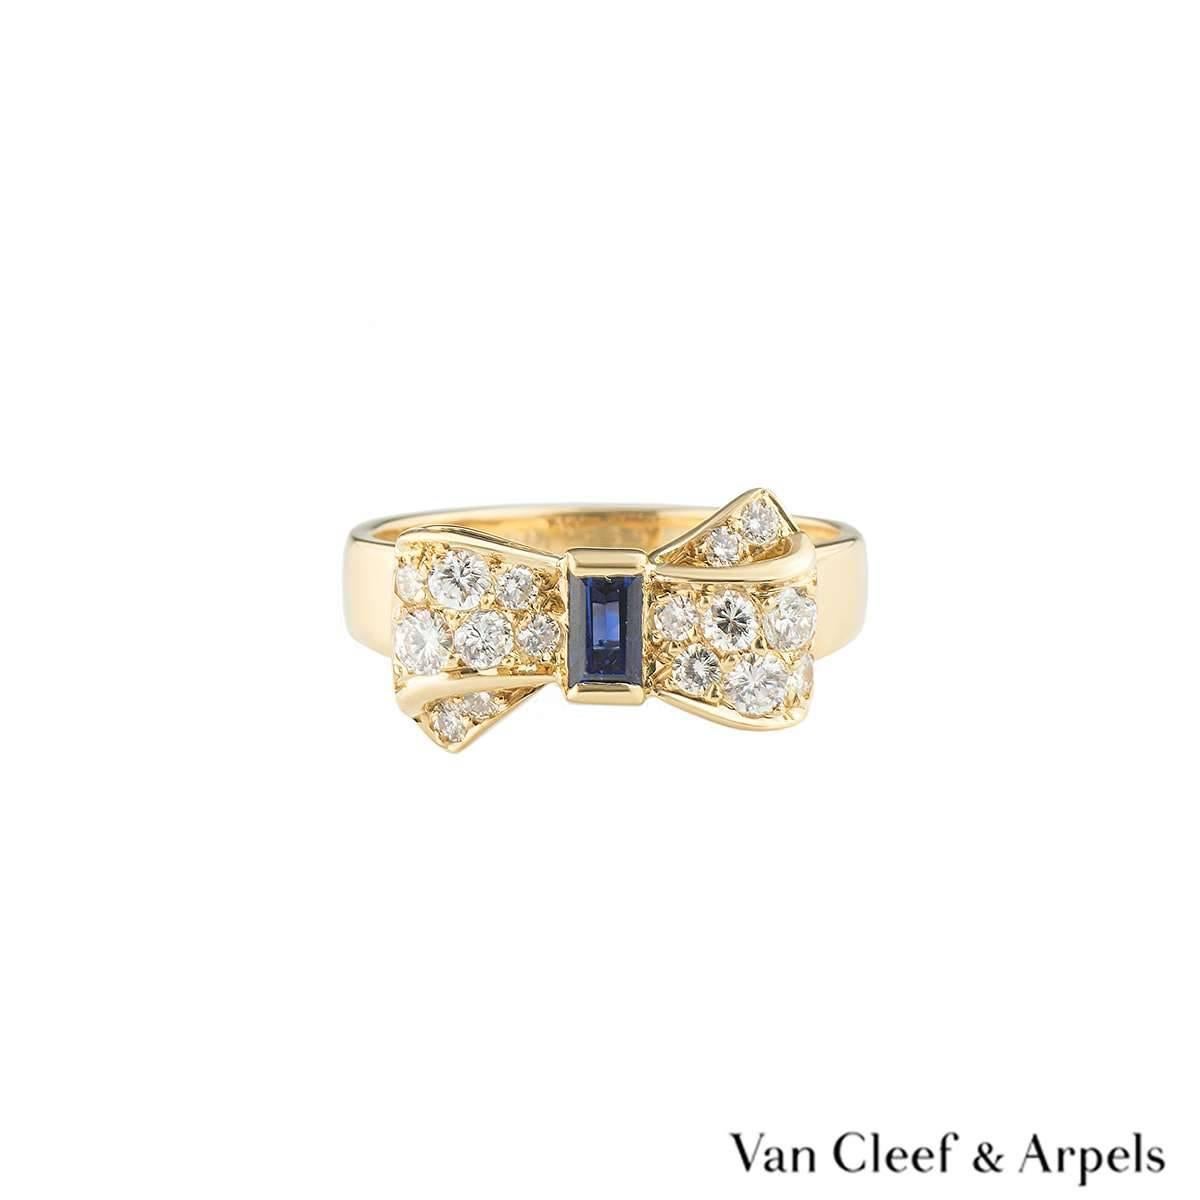 A pretty 18k yellow gold Van Cleef and Arpels dress ring. The ring comprises of a bow motif with a emerald cut sapphire in the centre with a total approximate weight of 0.16ct, with a deep blue hue throughout. On the either side of the sapphire are